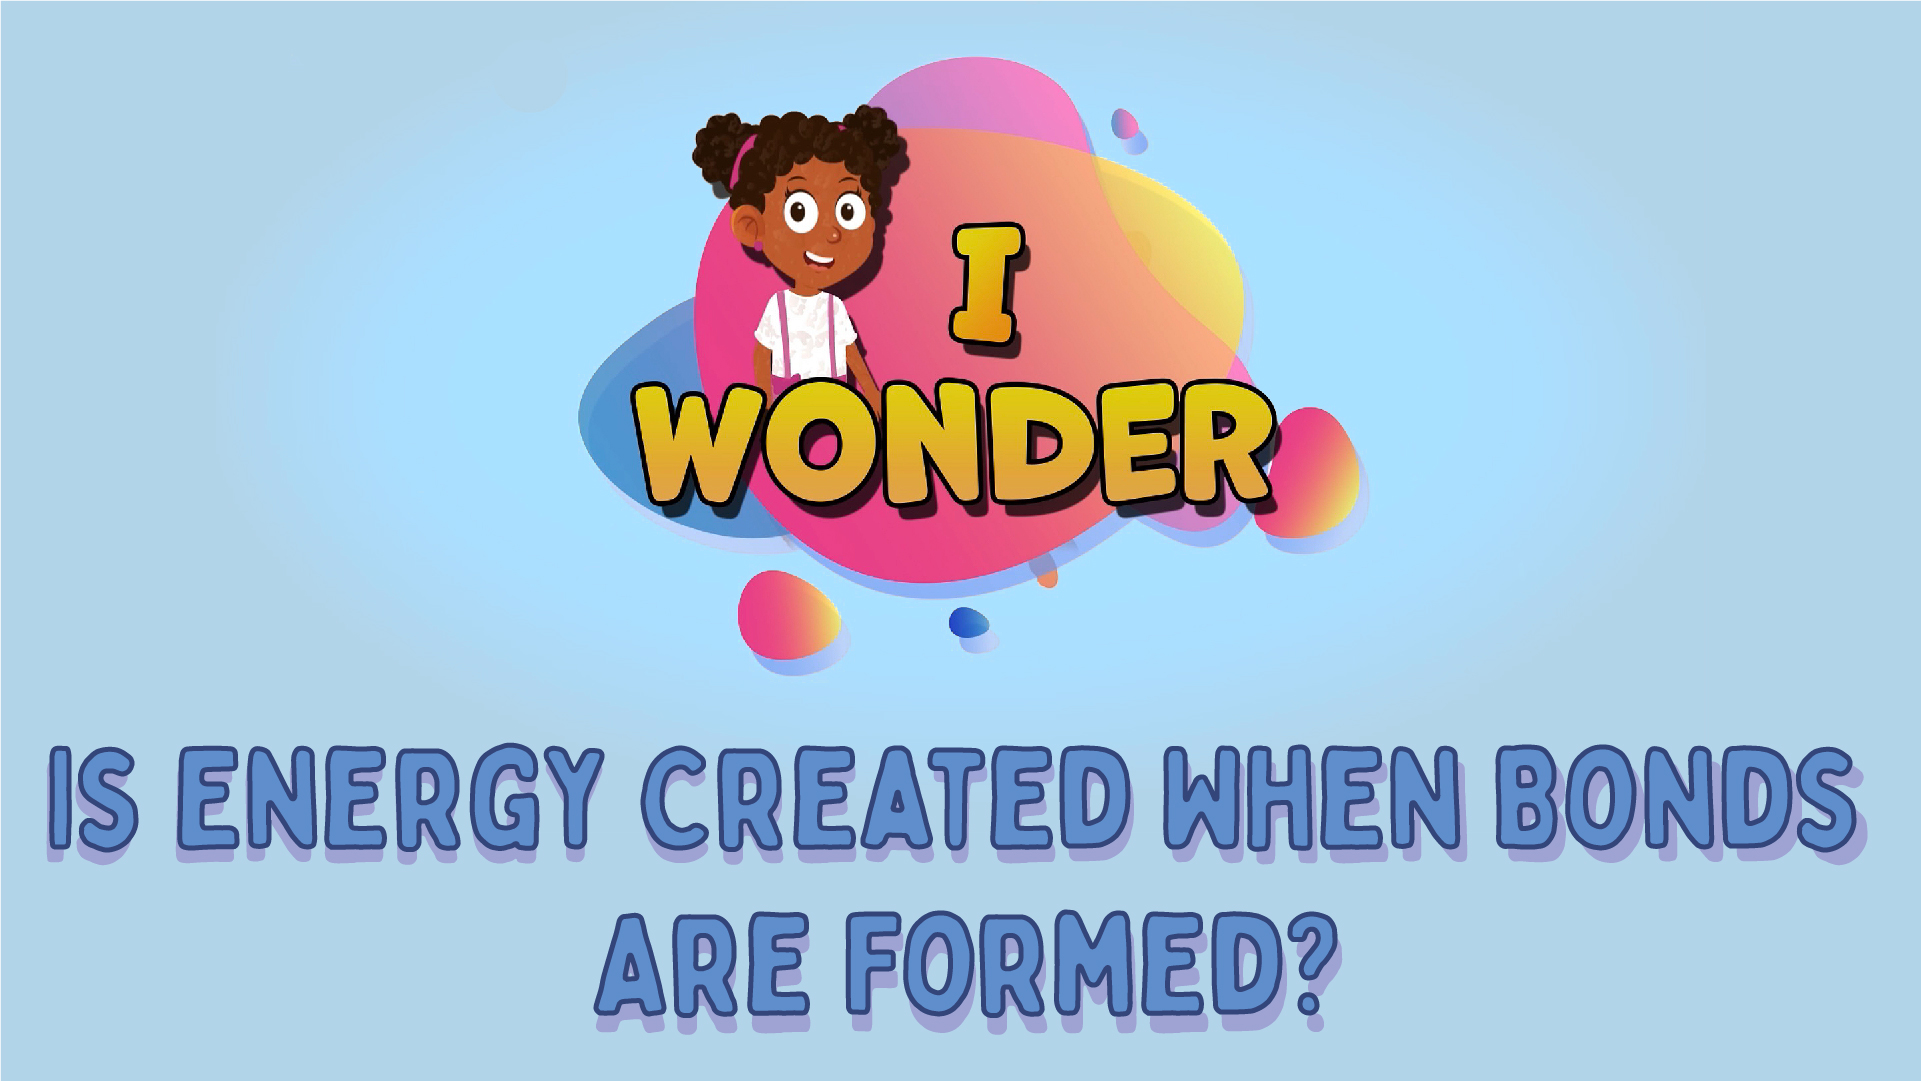 Is Energy Created When Bonds Are Formed?